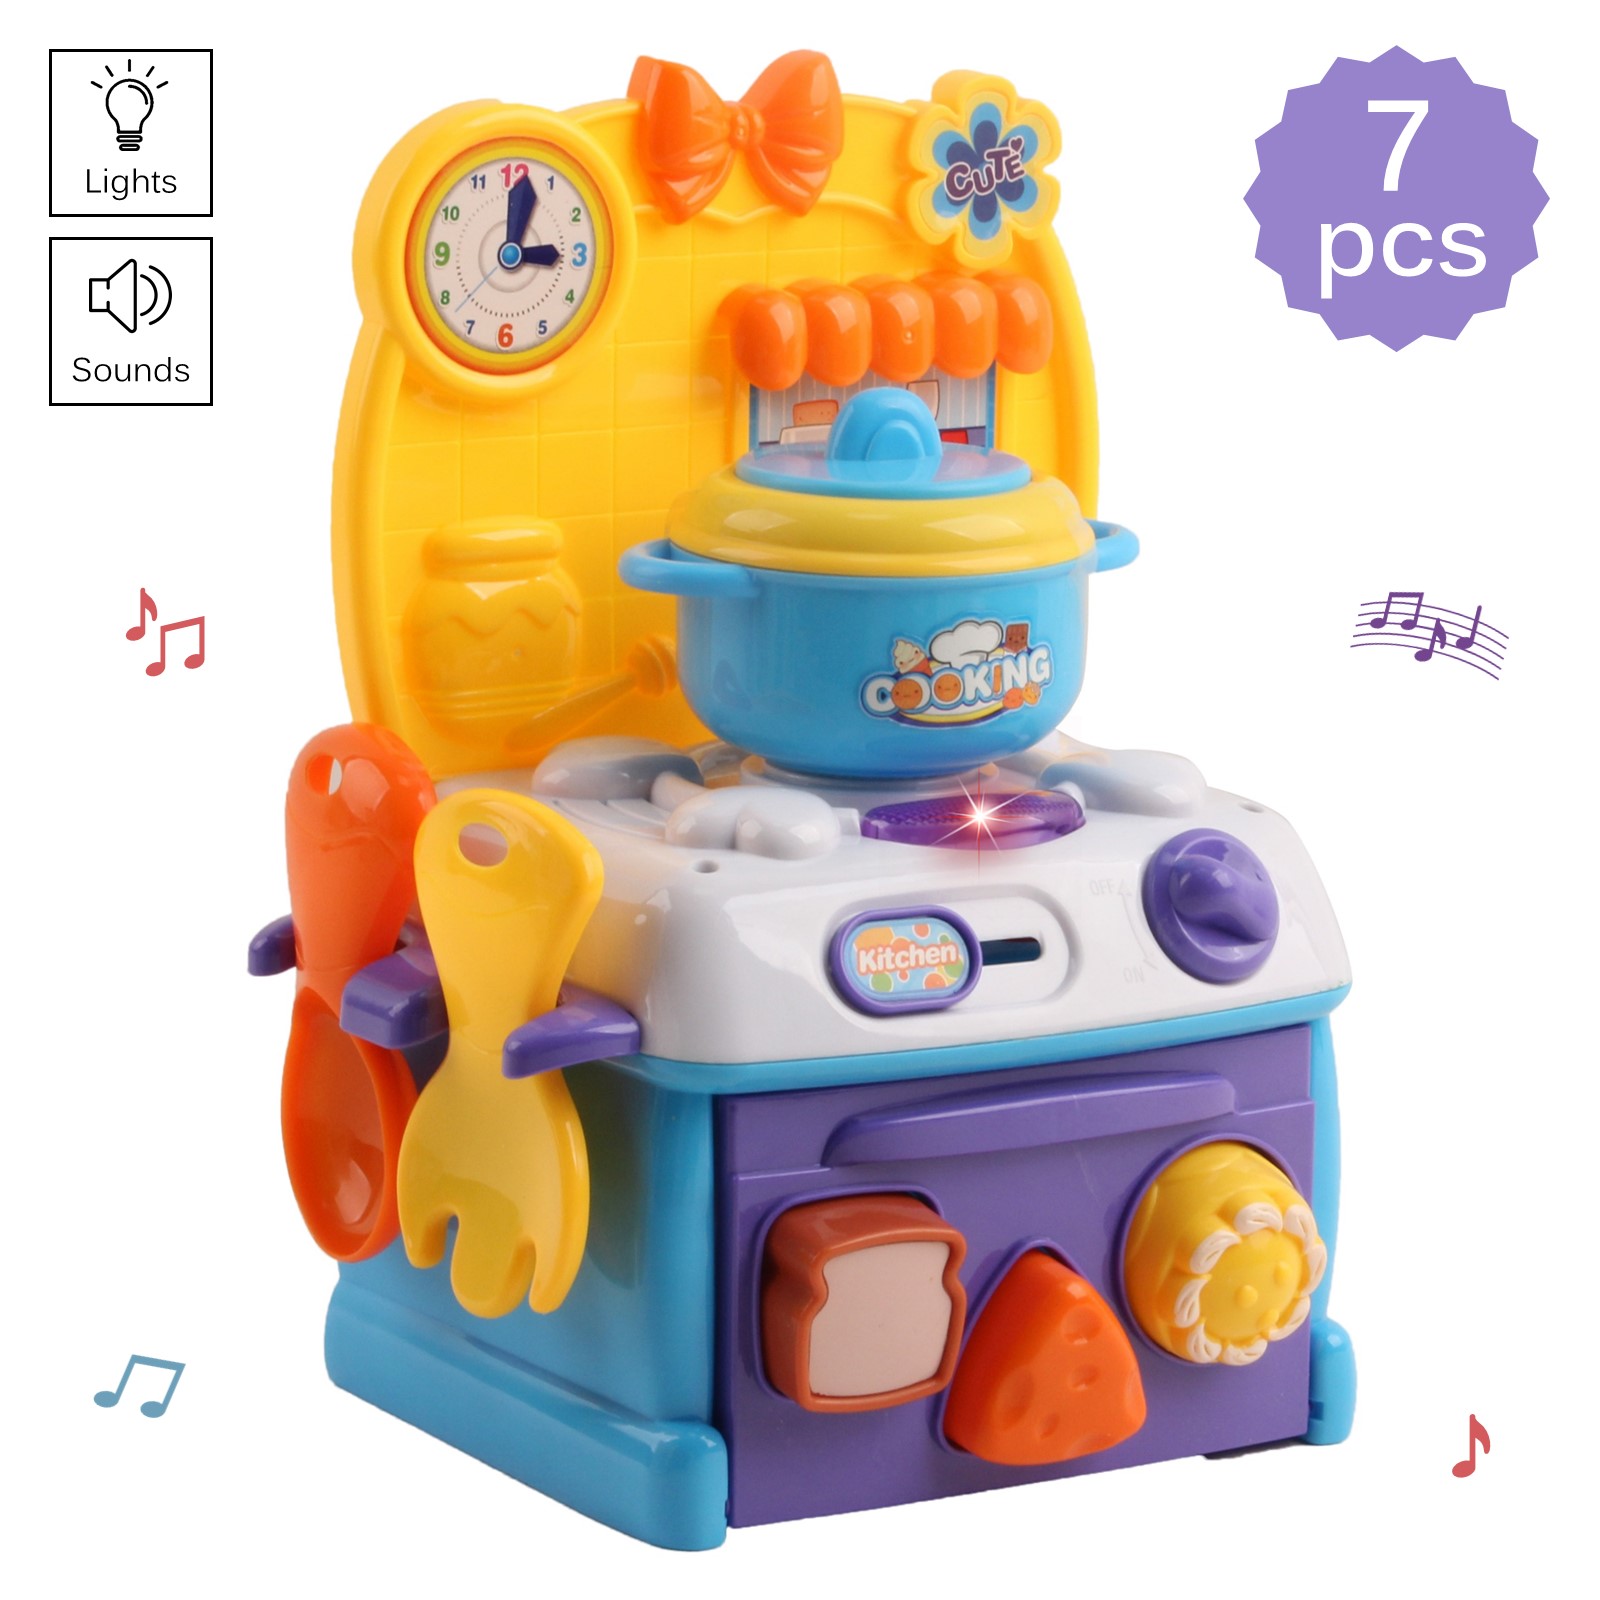 Vokodo Kids Kitchen Playset Compact Size With Light And Music Includes Oven Stove Pot And Food Pieces Pretend Play Chef Early Learning Preschool Cooking Toy Great Gift For Children Boys Girls Toddlers